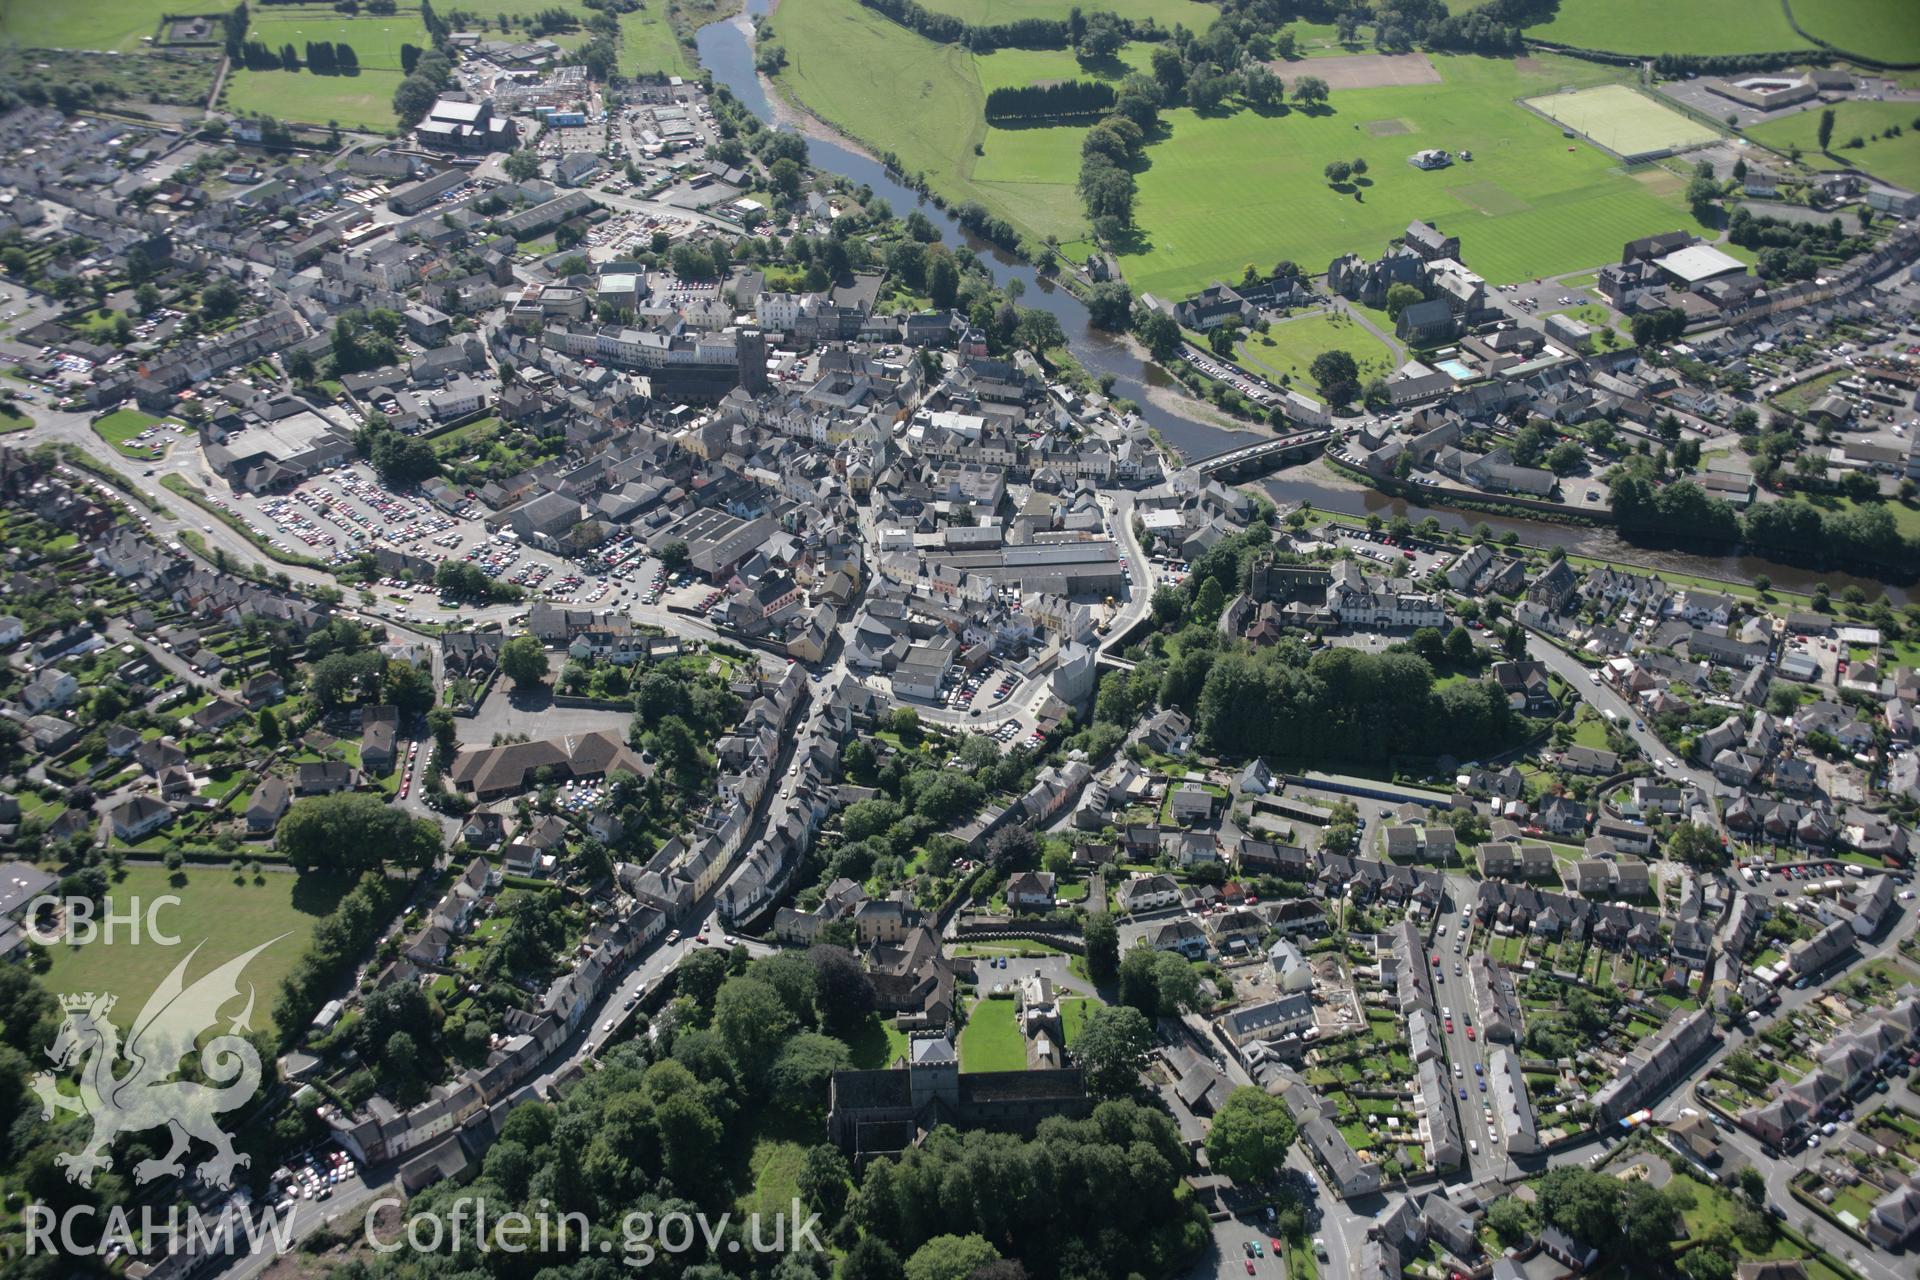 RCAHMW colour oblique aerial photograph of Brecon. A high view of the town centre looking south. Taken on 02 September 2005 by Toby Driver